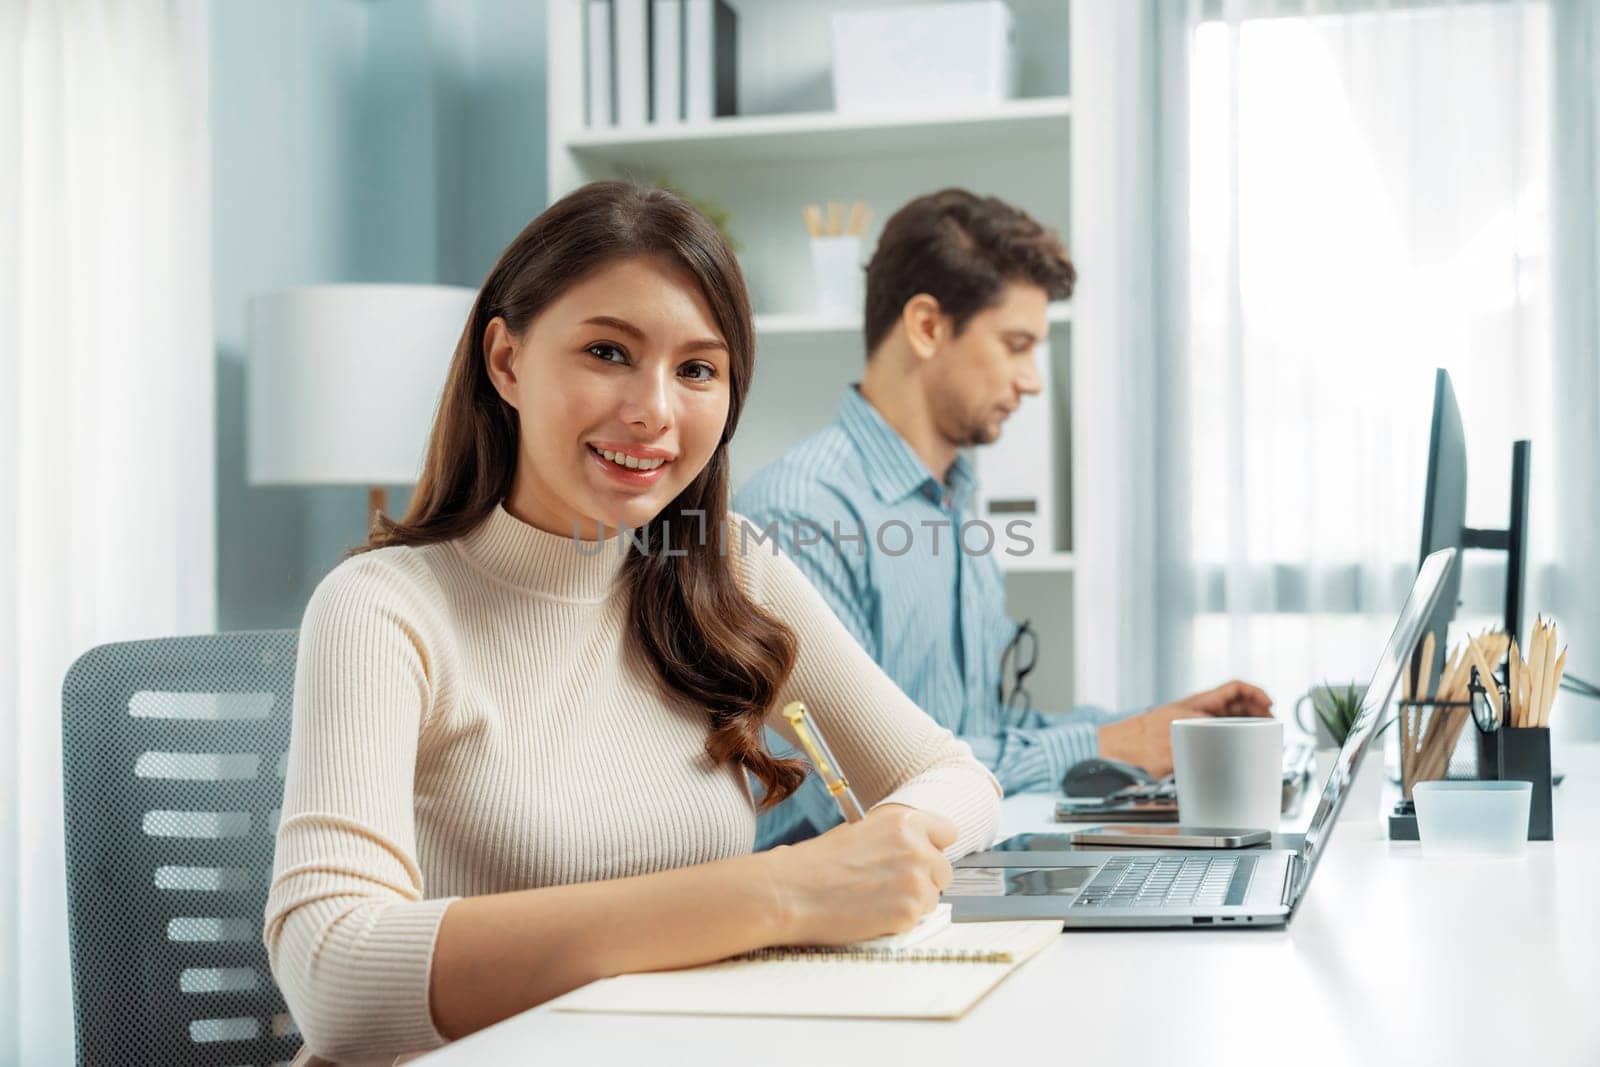 Smiling beautiful woman taking crucial note on paperwork, looking at camera photo shooting portrait business pose profile while working with smart coworker at modern office at morning time. Postulate.